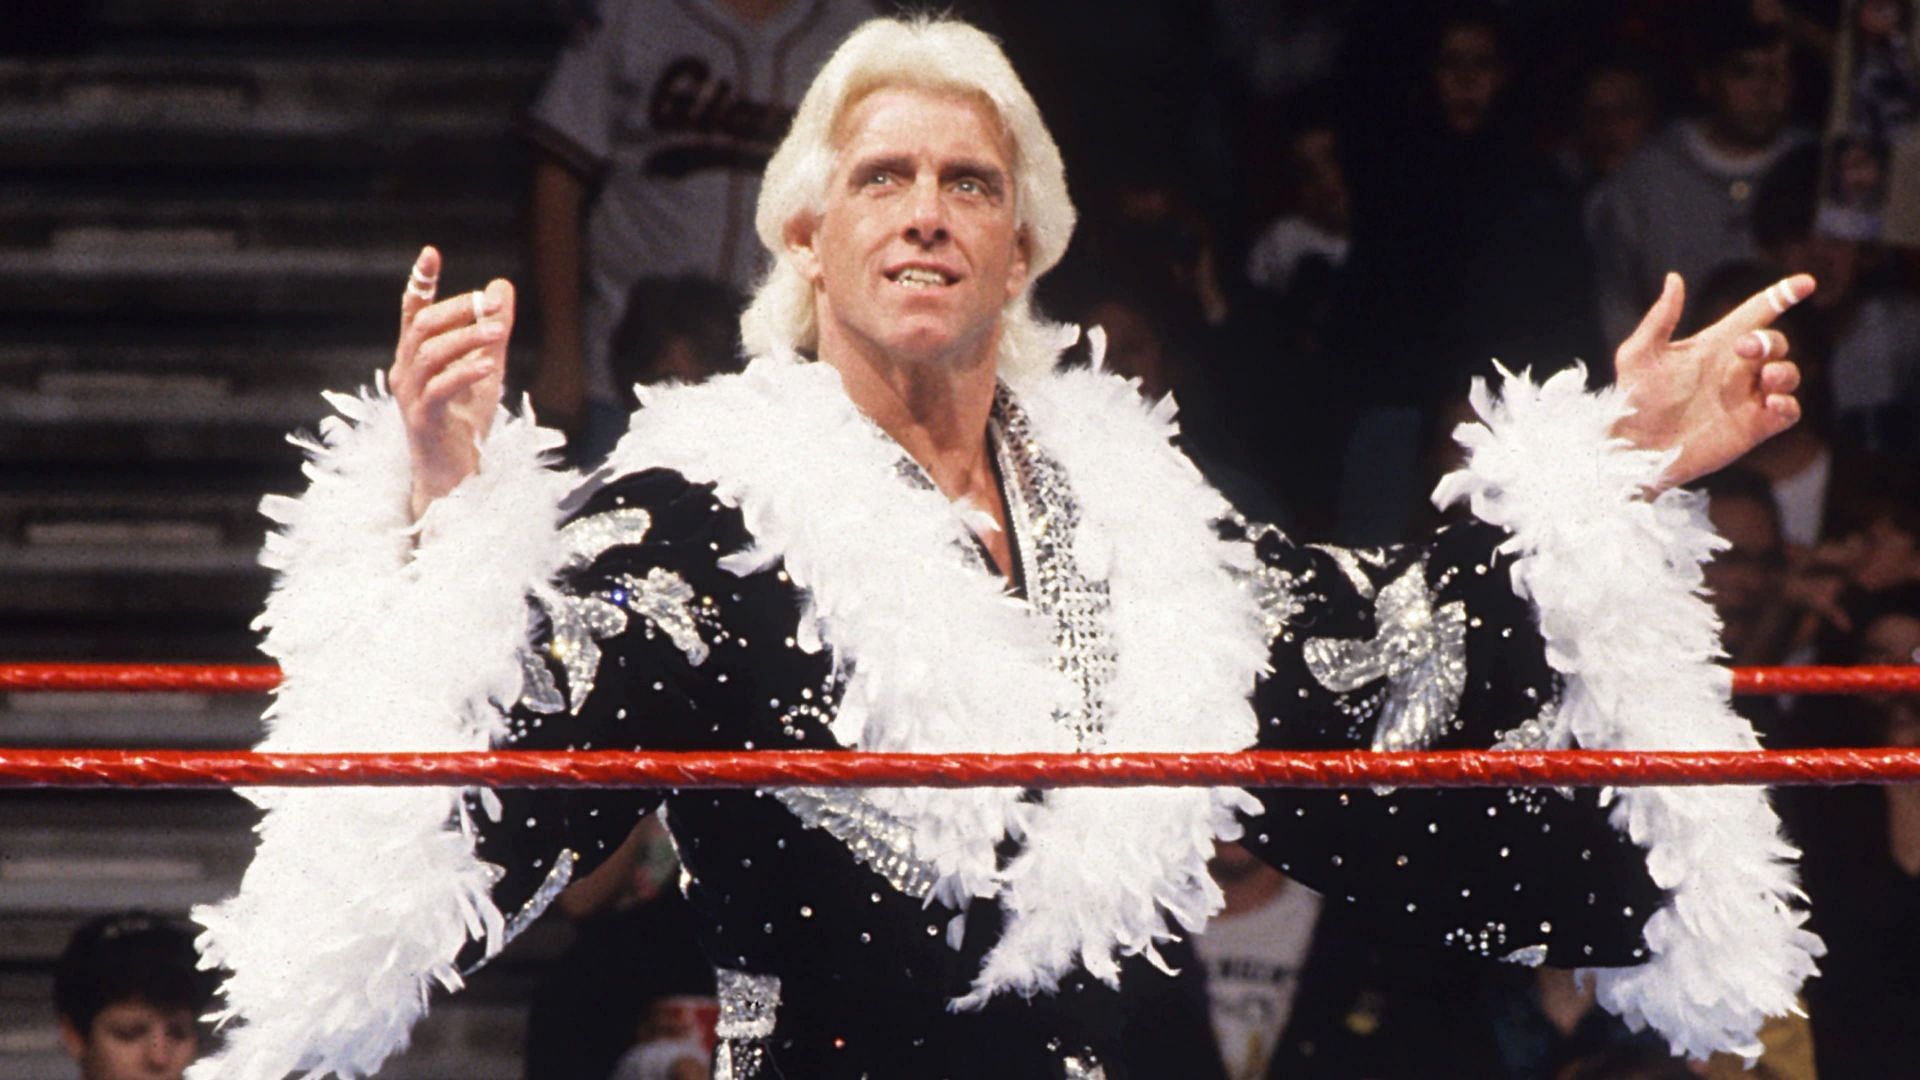 Ric Flair is a 16-time World Champion and WWE Hall of Famer